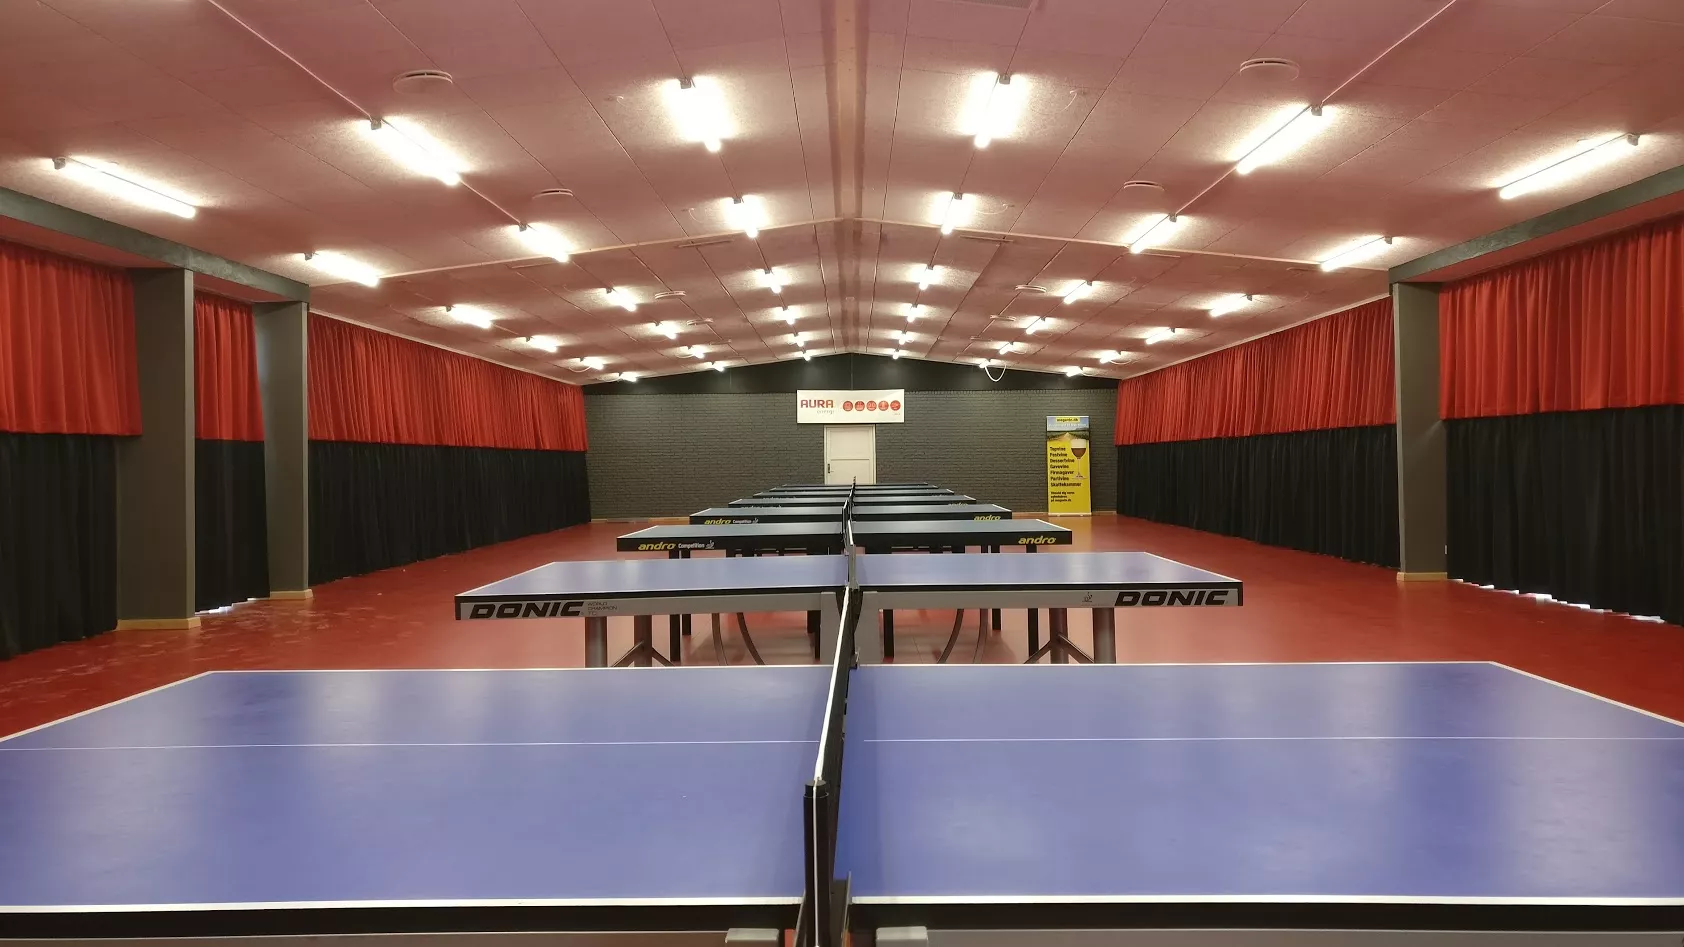 BTK Viby in Denmark, Europe | Ping-Pong - Rated 0.8